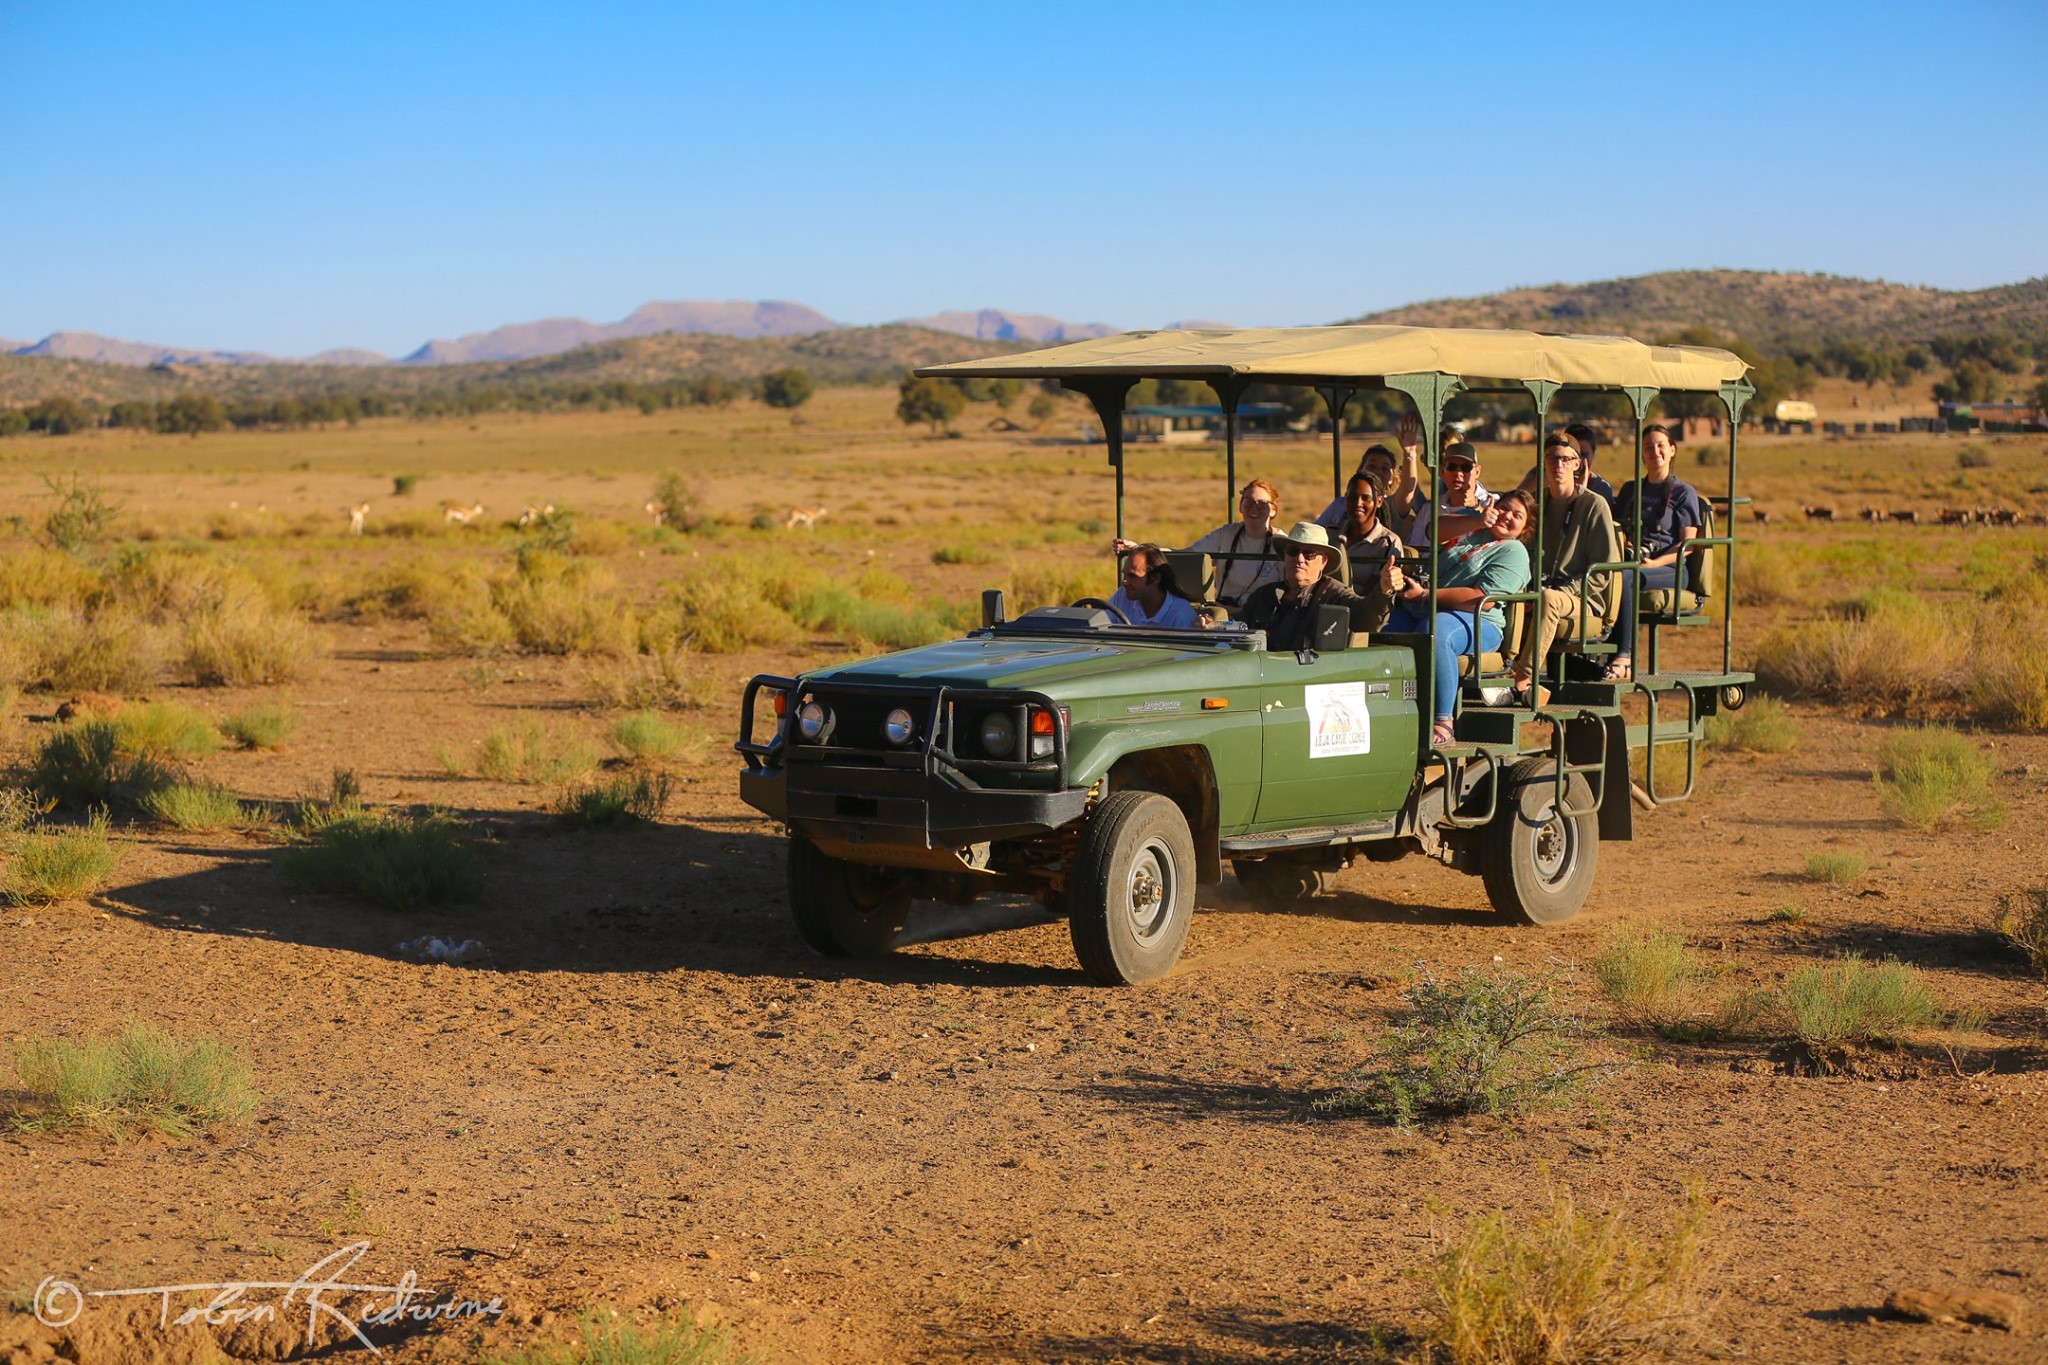 Students on a safari in Namibia